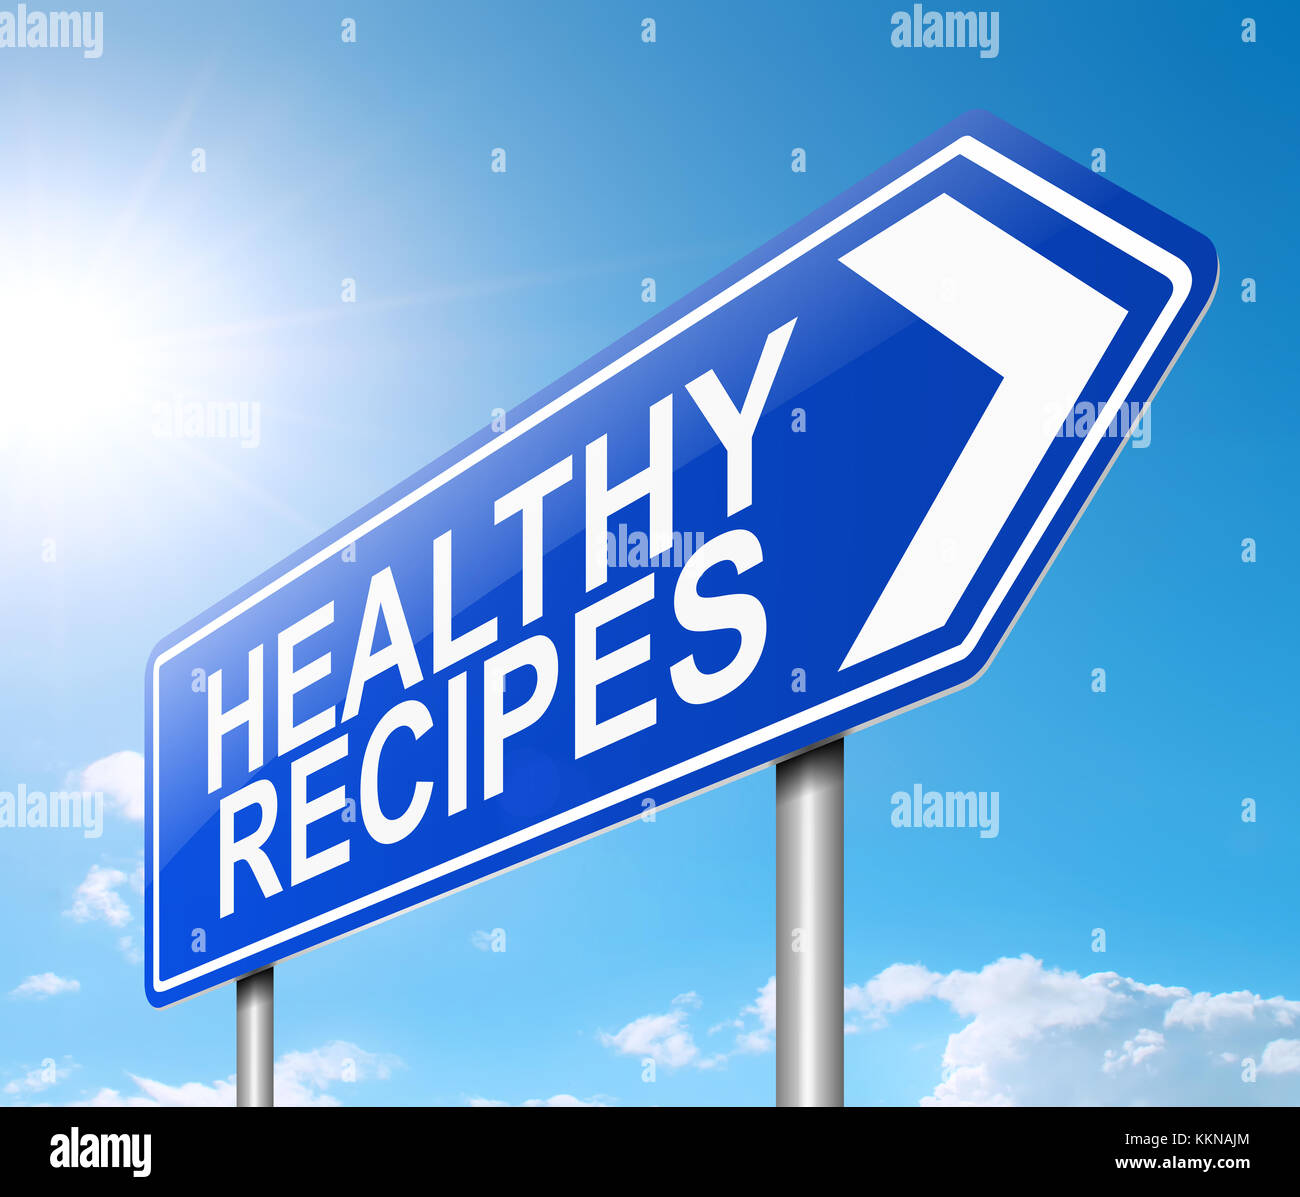 3d Illustration depicting a sign with a healthy recipes  concept. Stock Photo